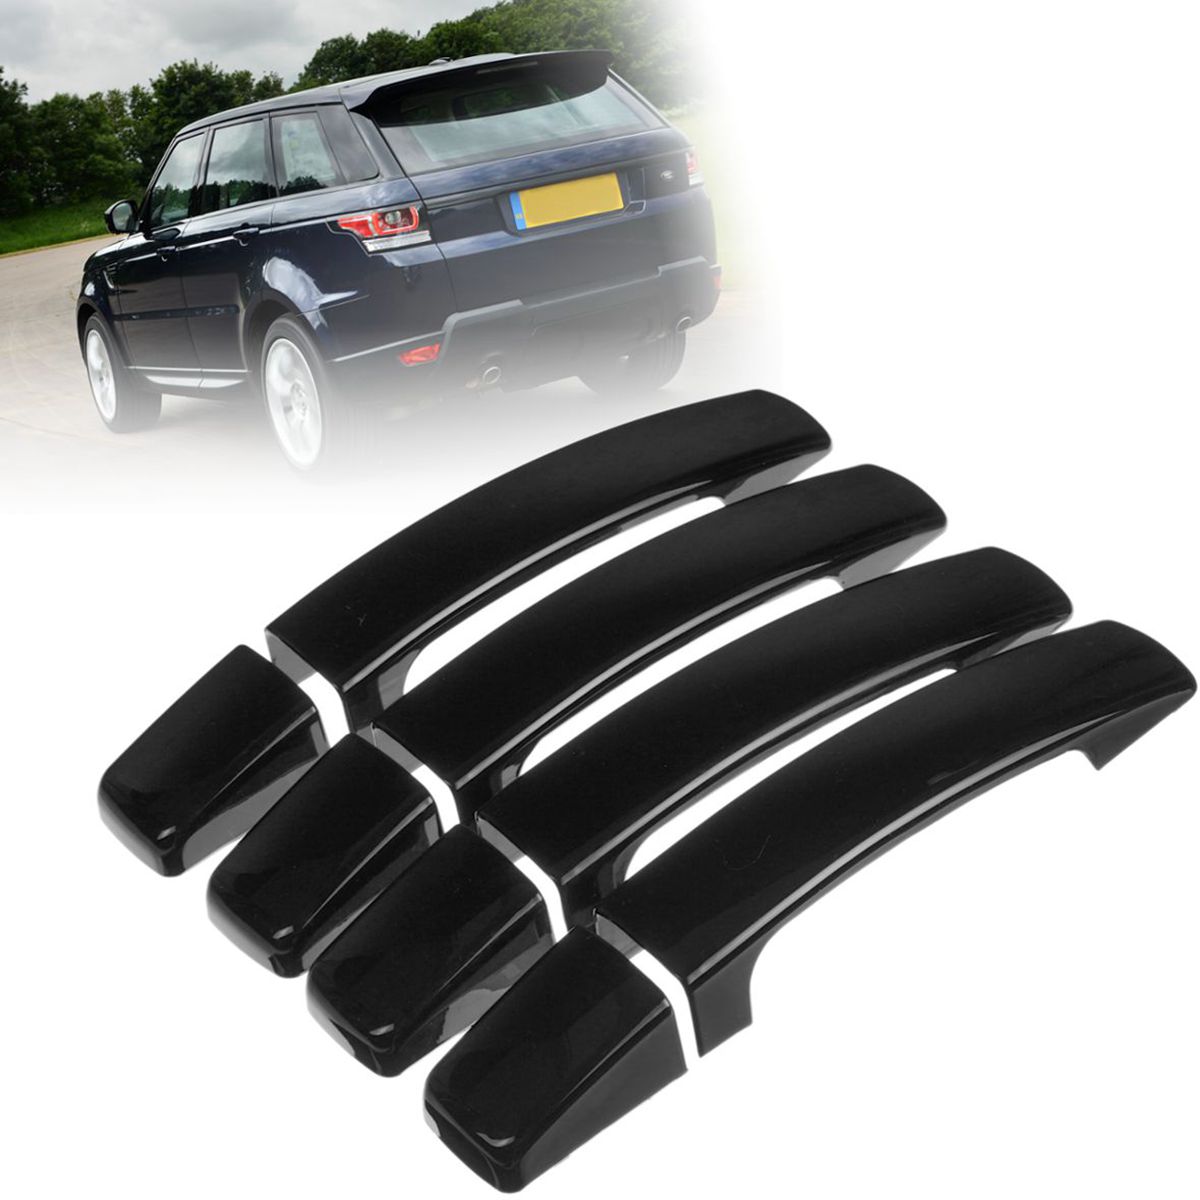 Black 8X ABS Gloss Black Door Handle Cover Trim for Range Rover Sport Discovery 3 Freelander 2 2005-2009